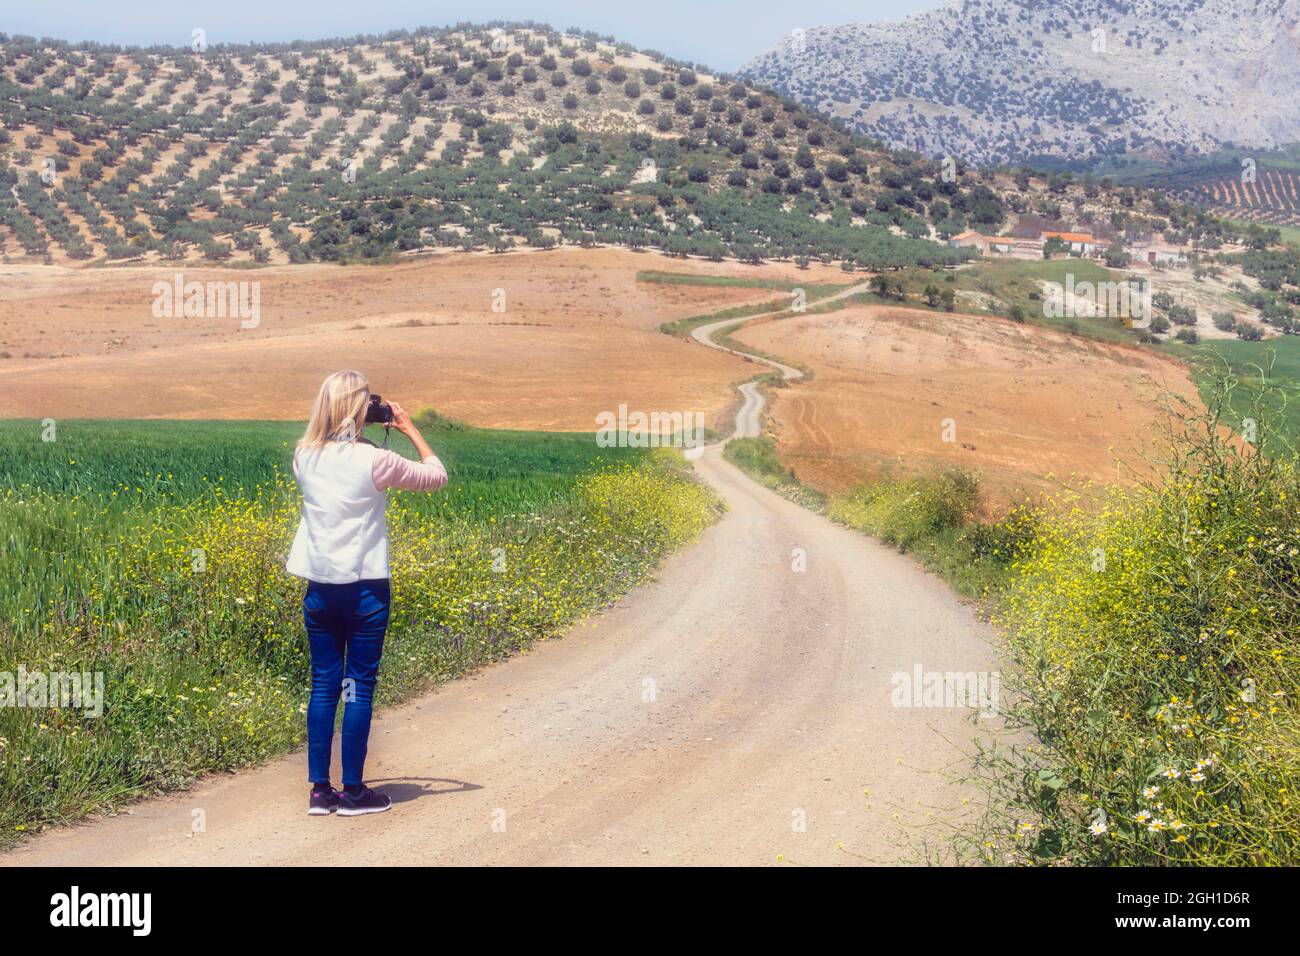 Woman photographing landscape with winding country track near Casabermeja, Malaga Province, Andalusia, southern Spain. Stock Photo